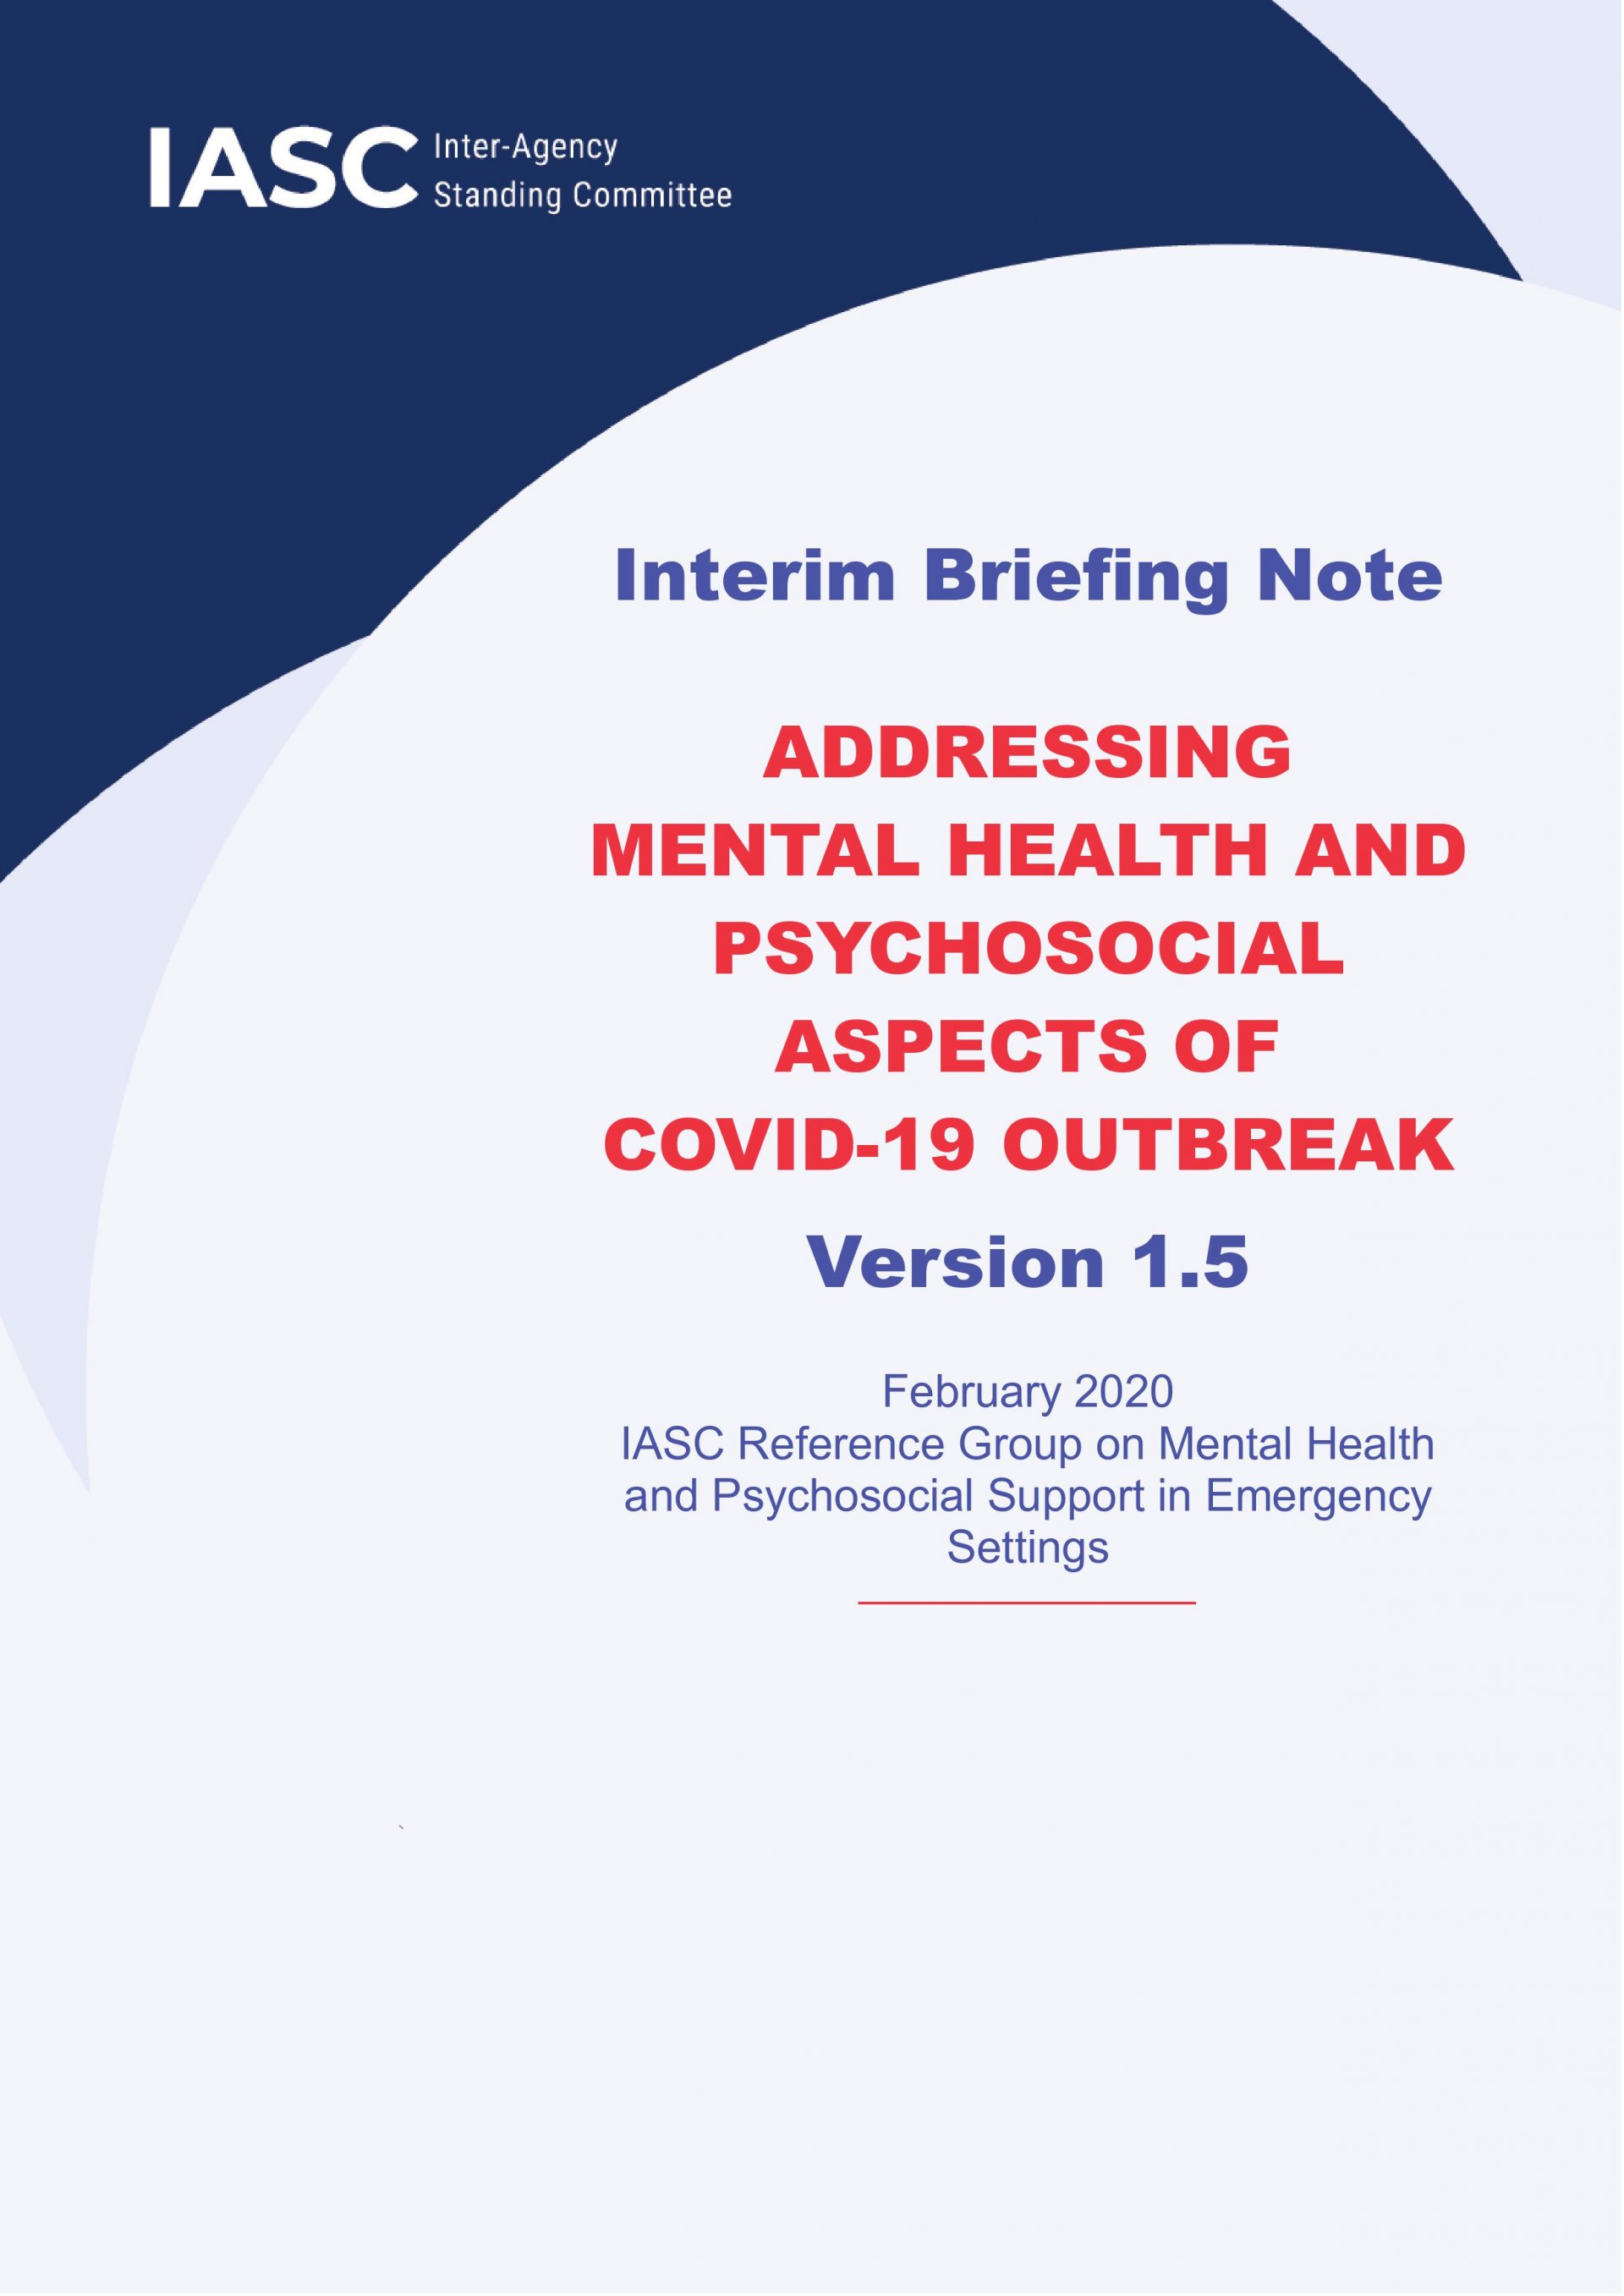 Interim Briefing Note: Addressing mental health and psychosocial aspects of COVID-19 outbreak (Version 1.5)